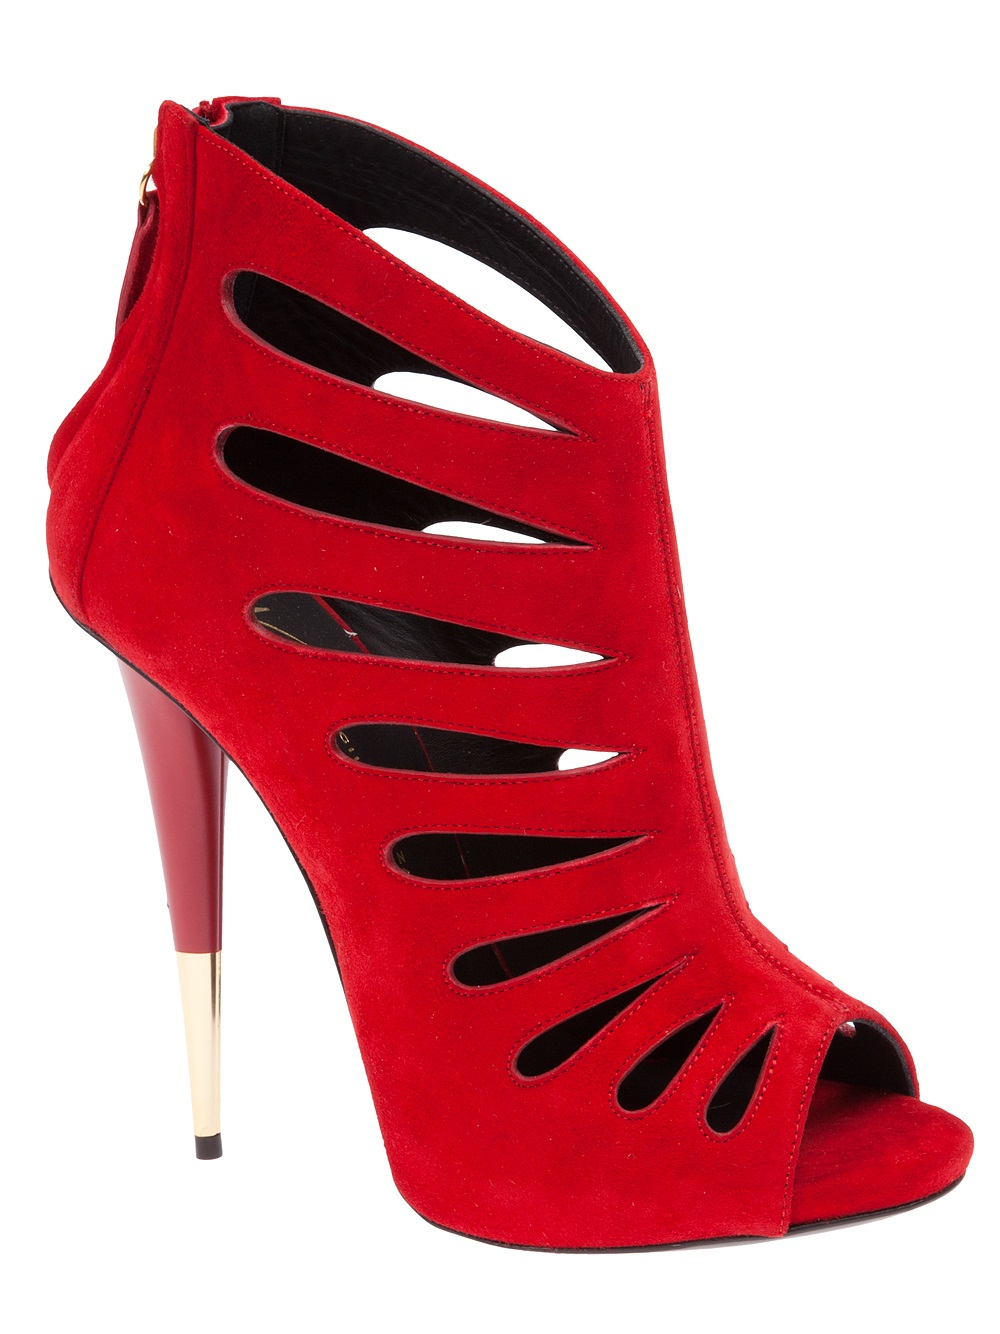 Lyst - Giuseppe Zanotti Cutout Ankle Boot in Red